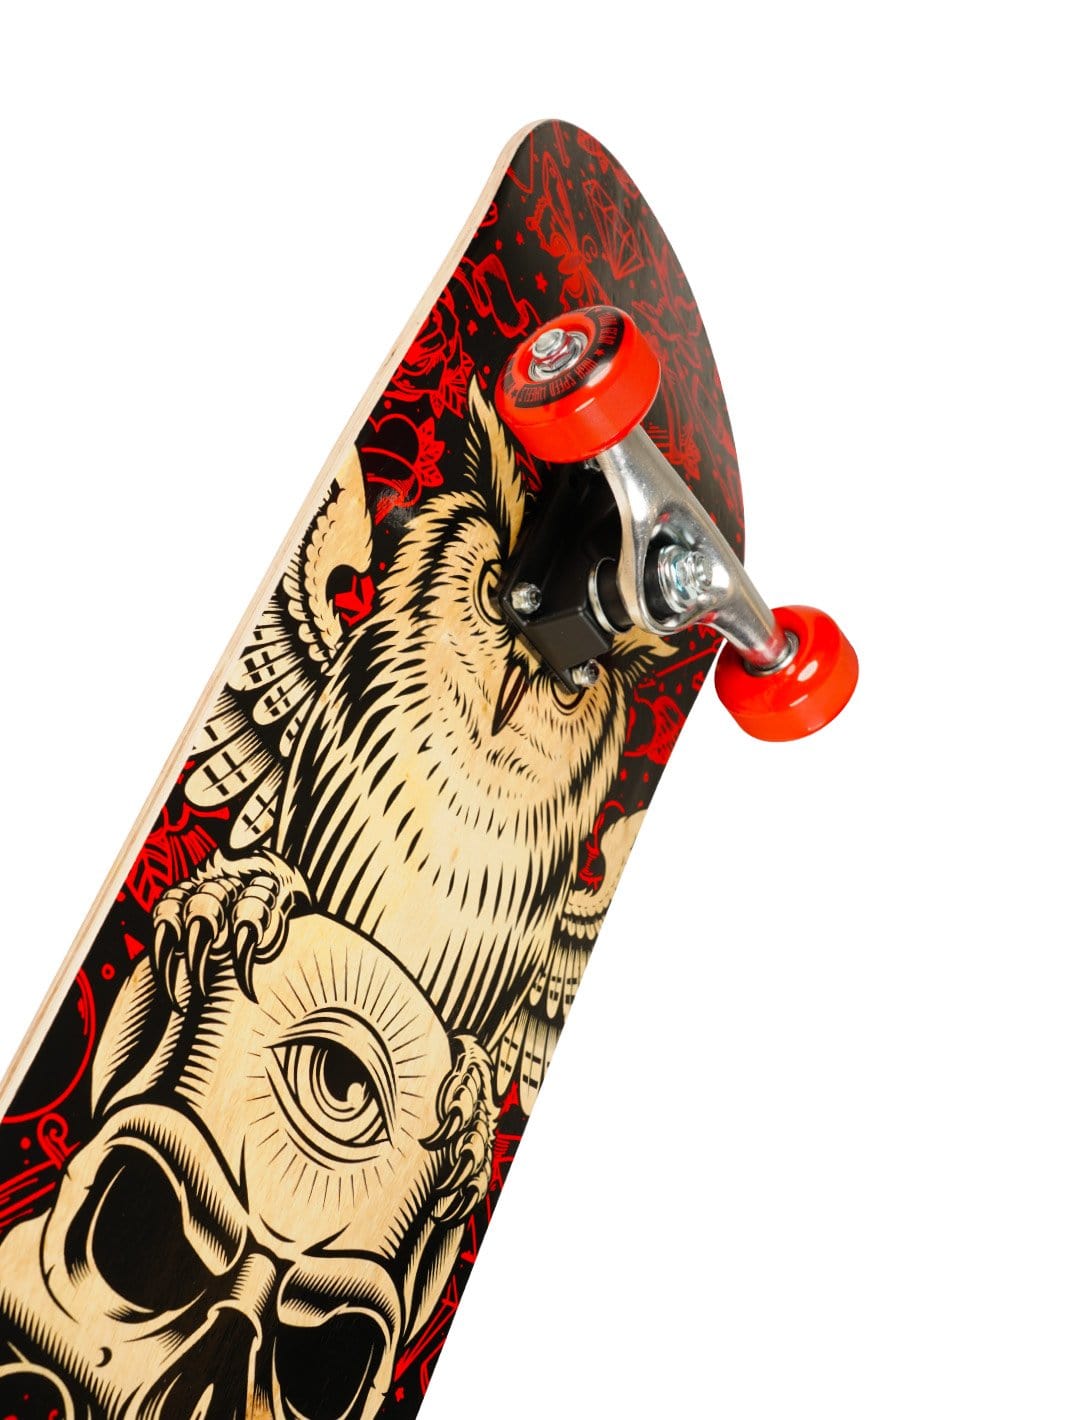 Madd Gear Complete Skateboard Maple Popsicle Red Wheels 31" Black Red Ply Aluminum Trucks High Quality